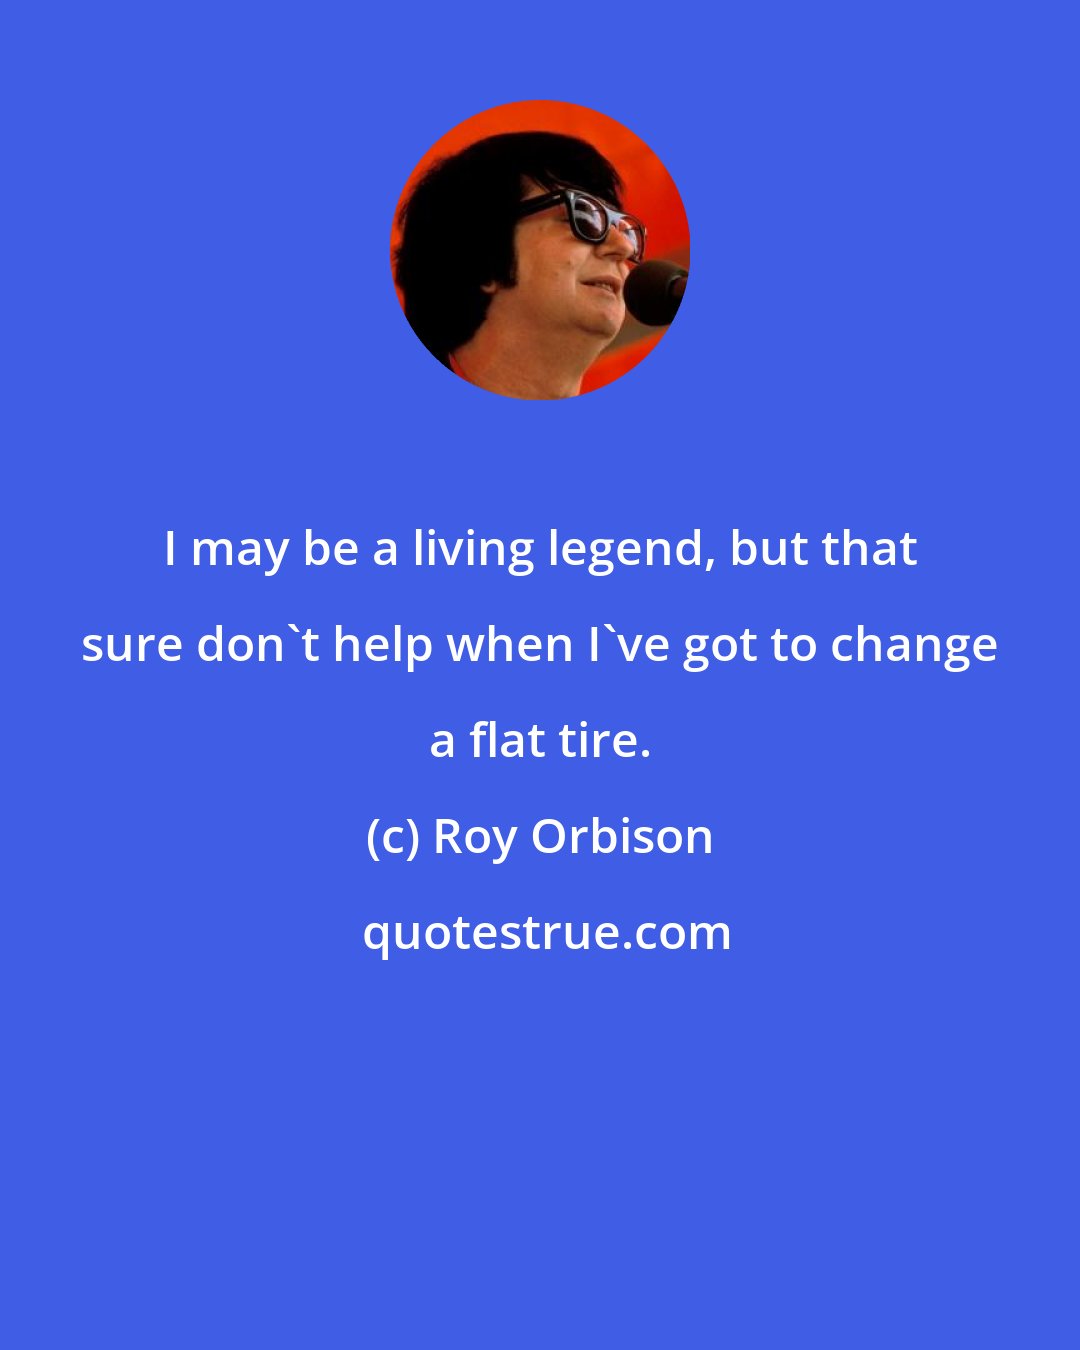 Roy Orbison: I may be a living legend, but that sure don't help when I've got to change a flat tire.